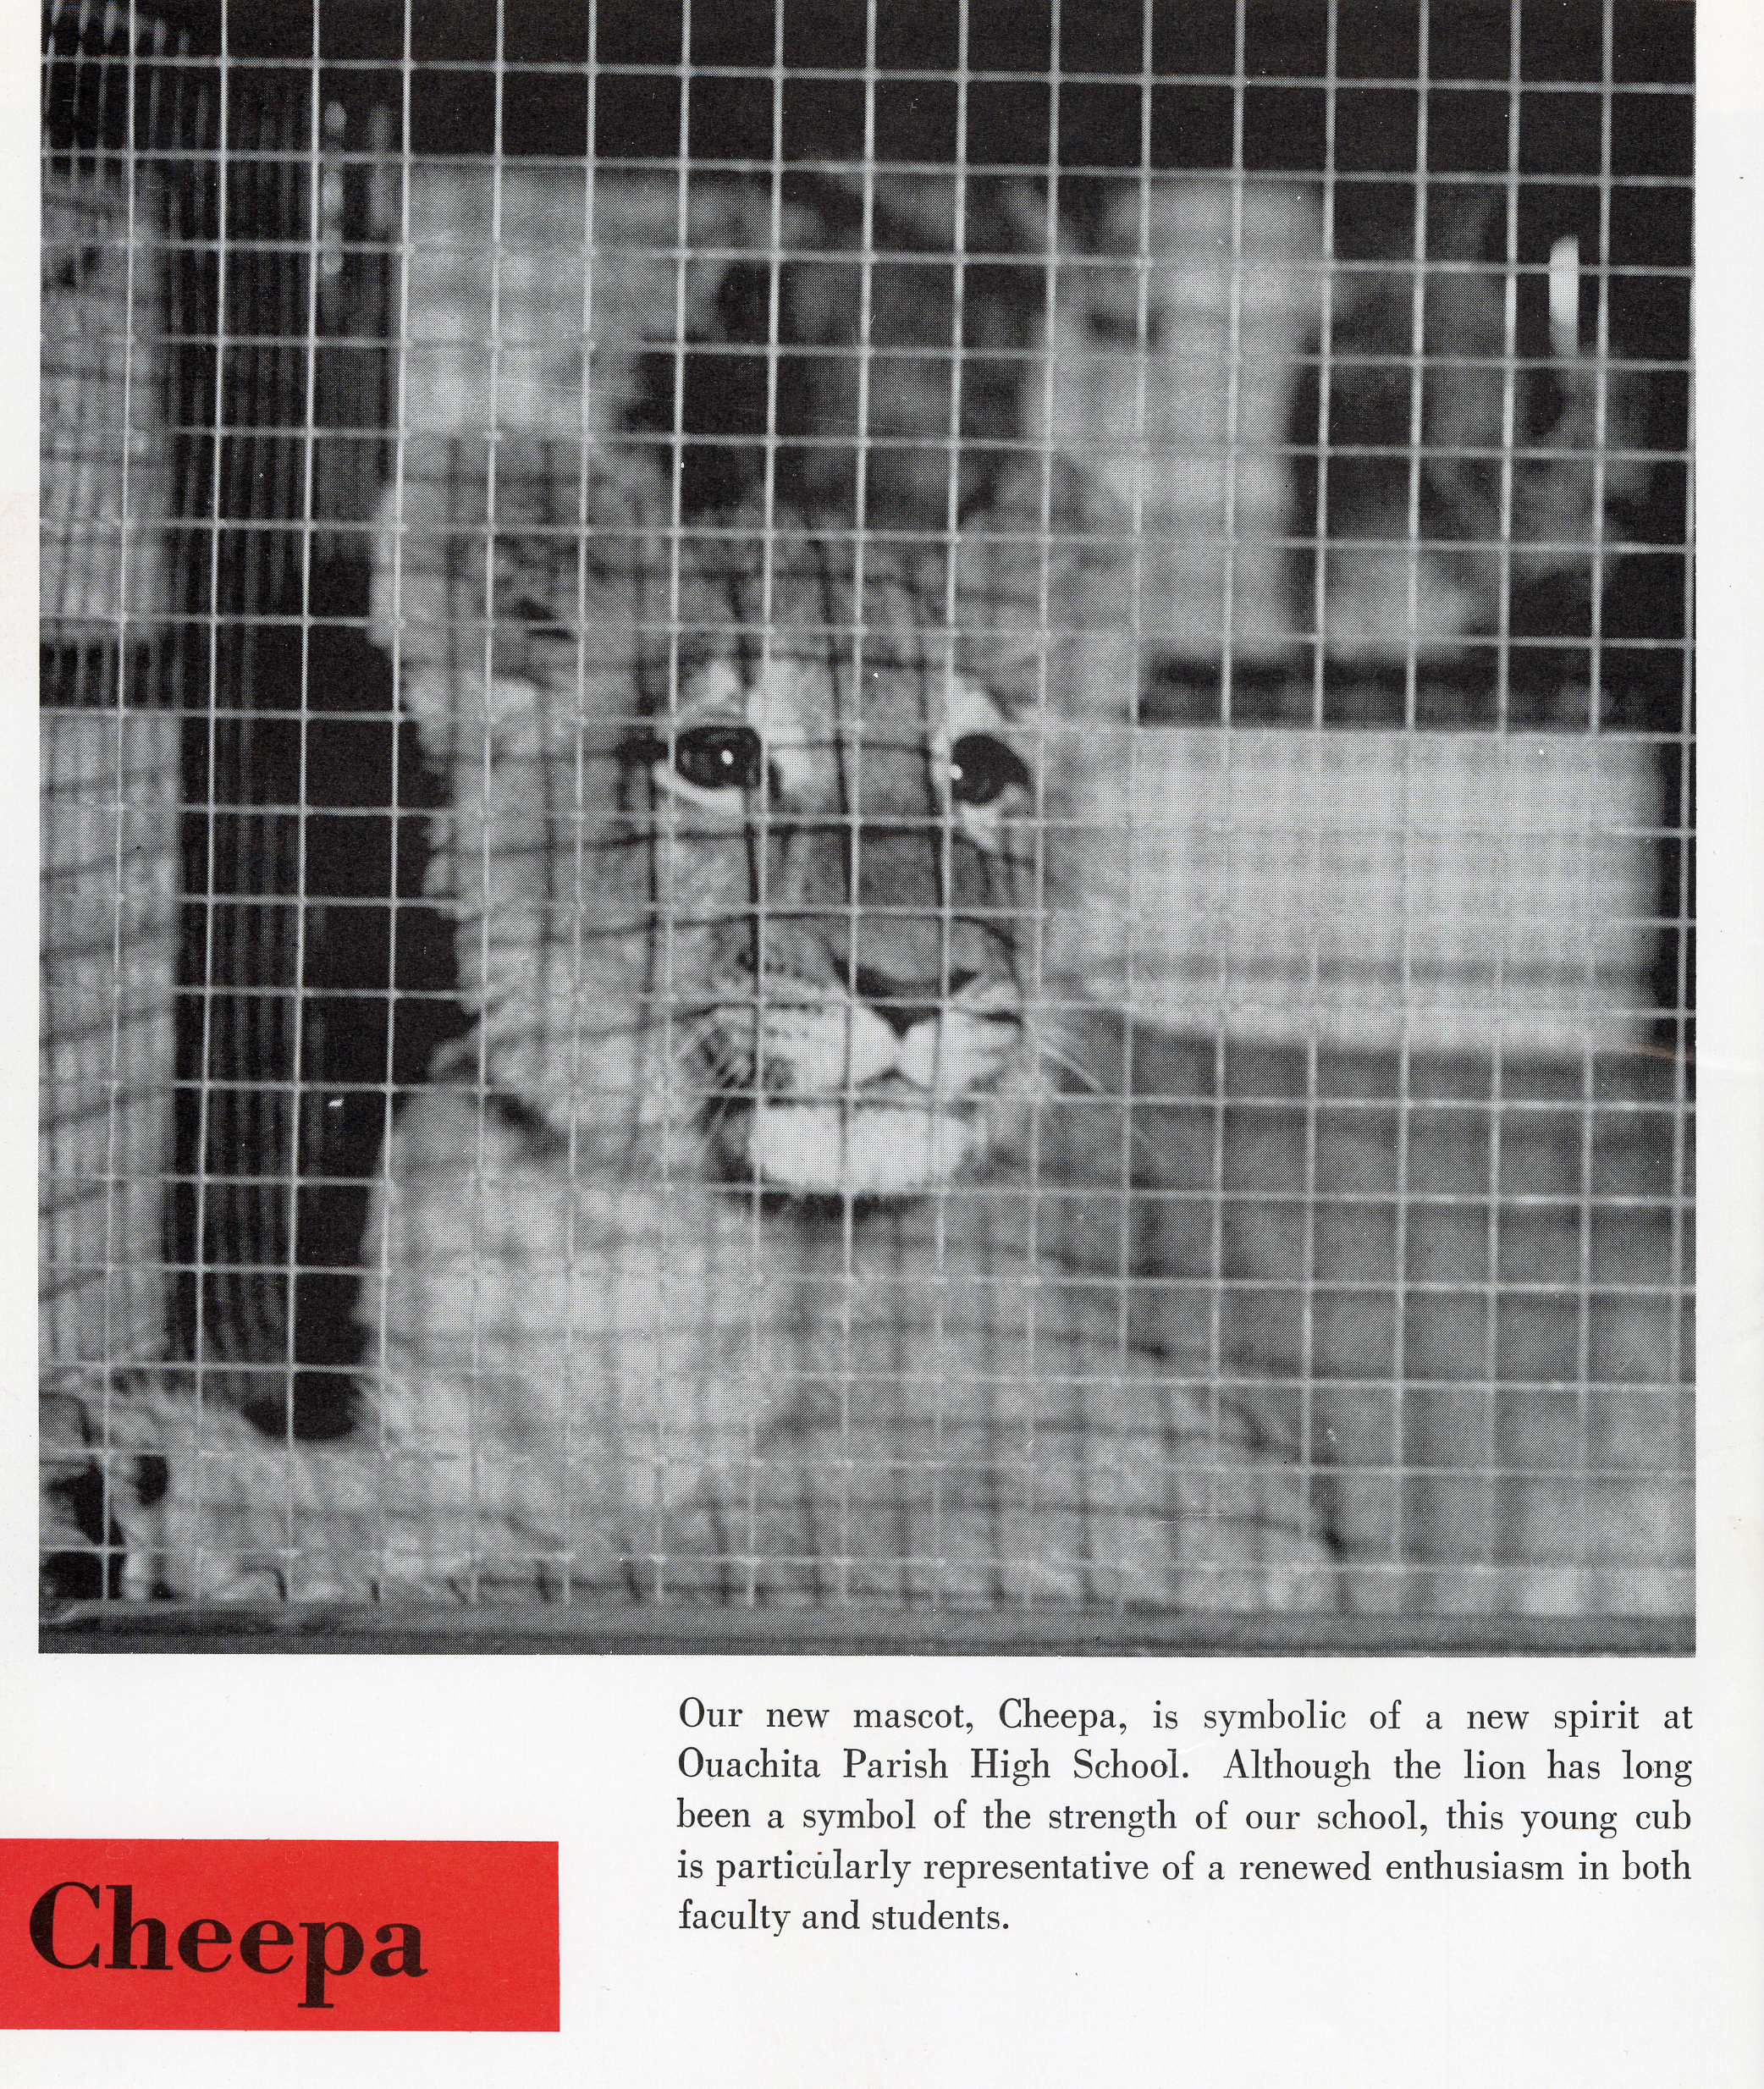 A scan from the 1964 Roarer yearbook. A lion cub is behind a cage. The caption reads, "Our new mascot, Cheepa, is symbolic of a new spirit at Ouachita Parish High School. Although the lion has long been a symbol of the strength of our school...